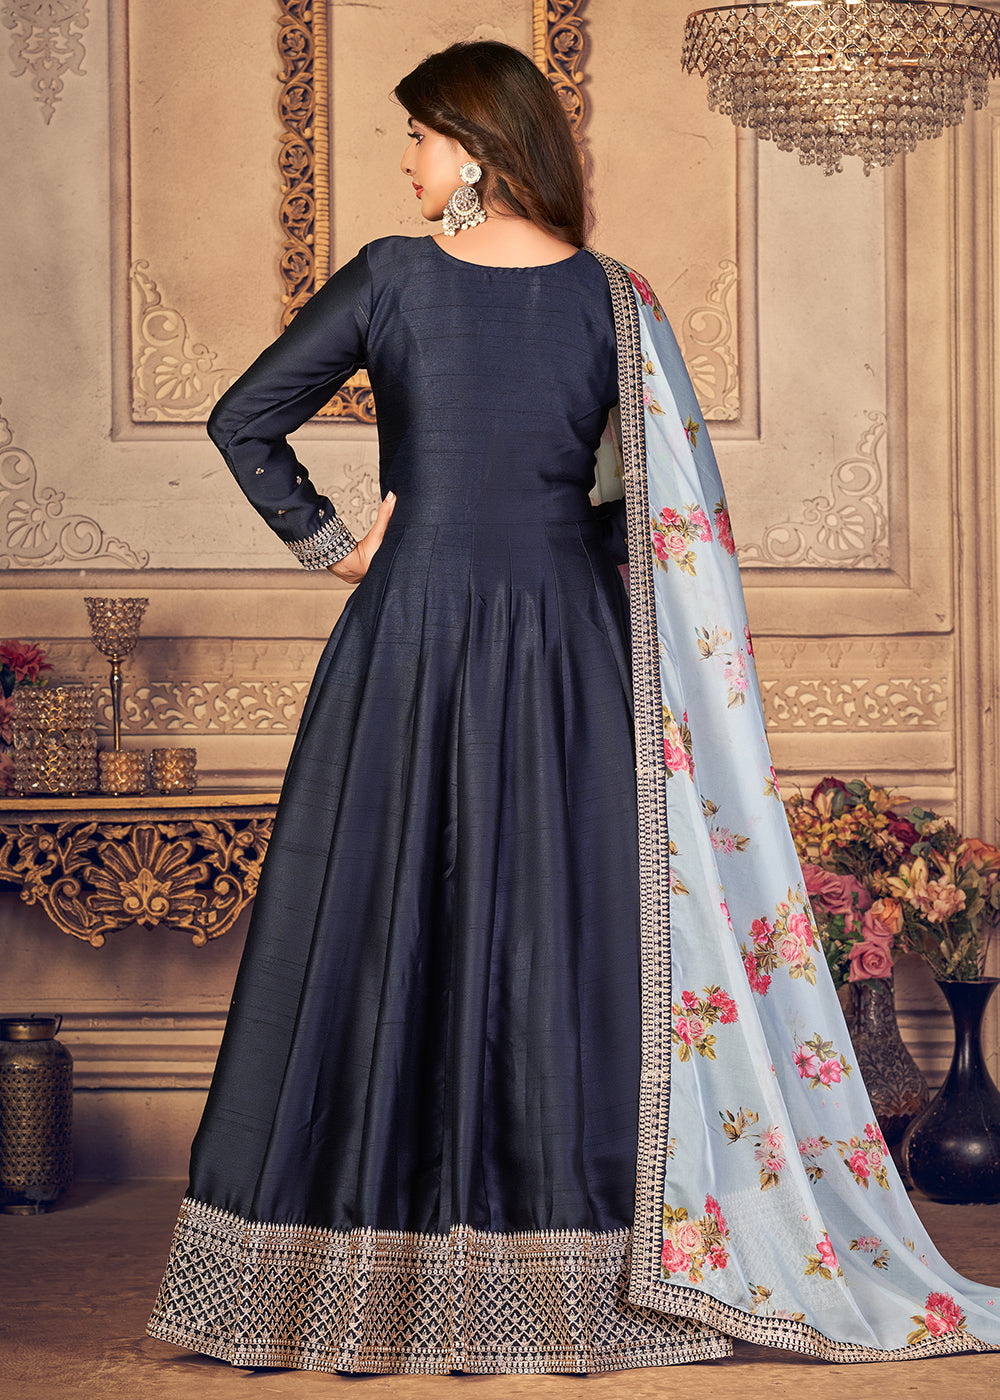 Buy Now Navy Blue Silk Beautifully Embroidered Floor Length Anarkali Suit Online in Canada at Empress Clothing.